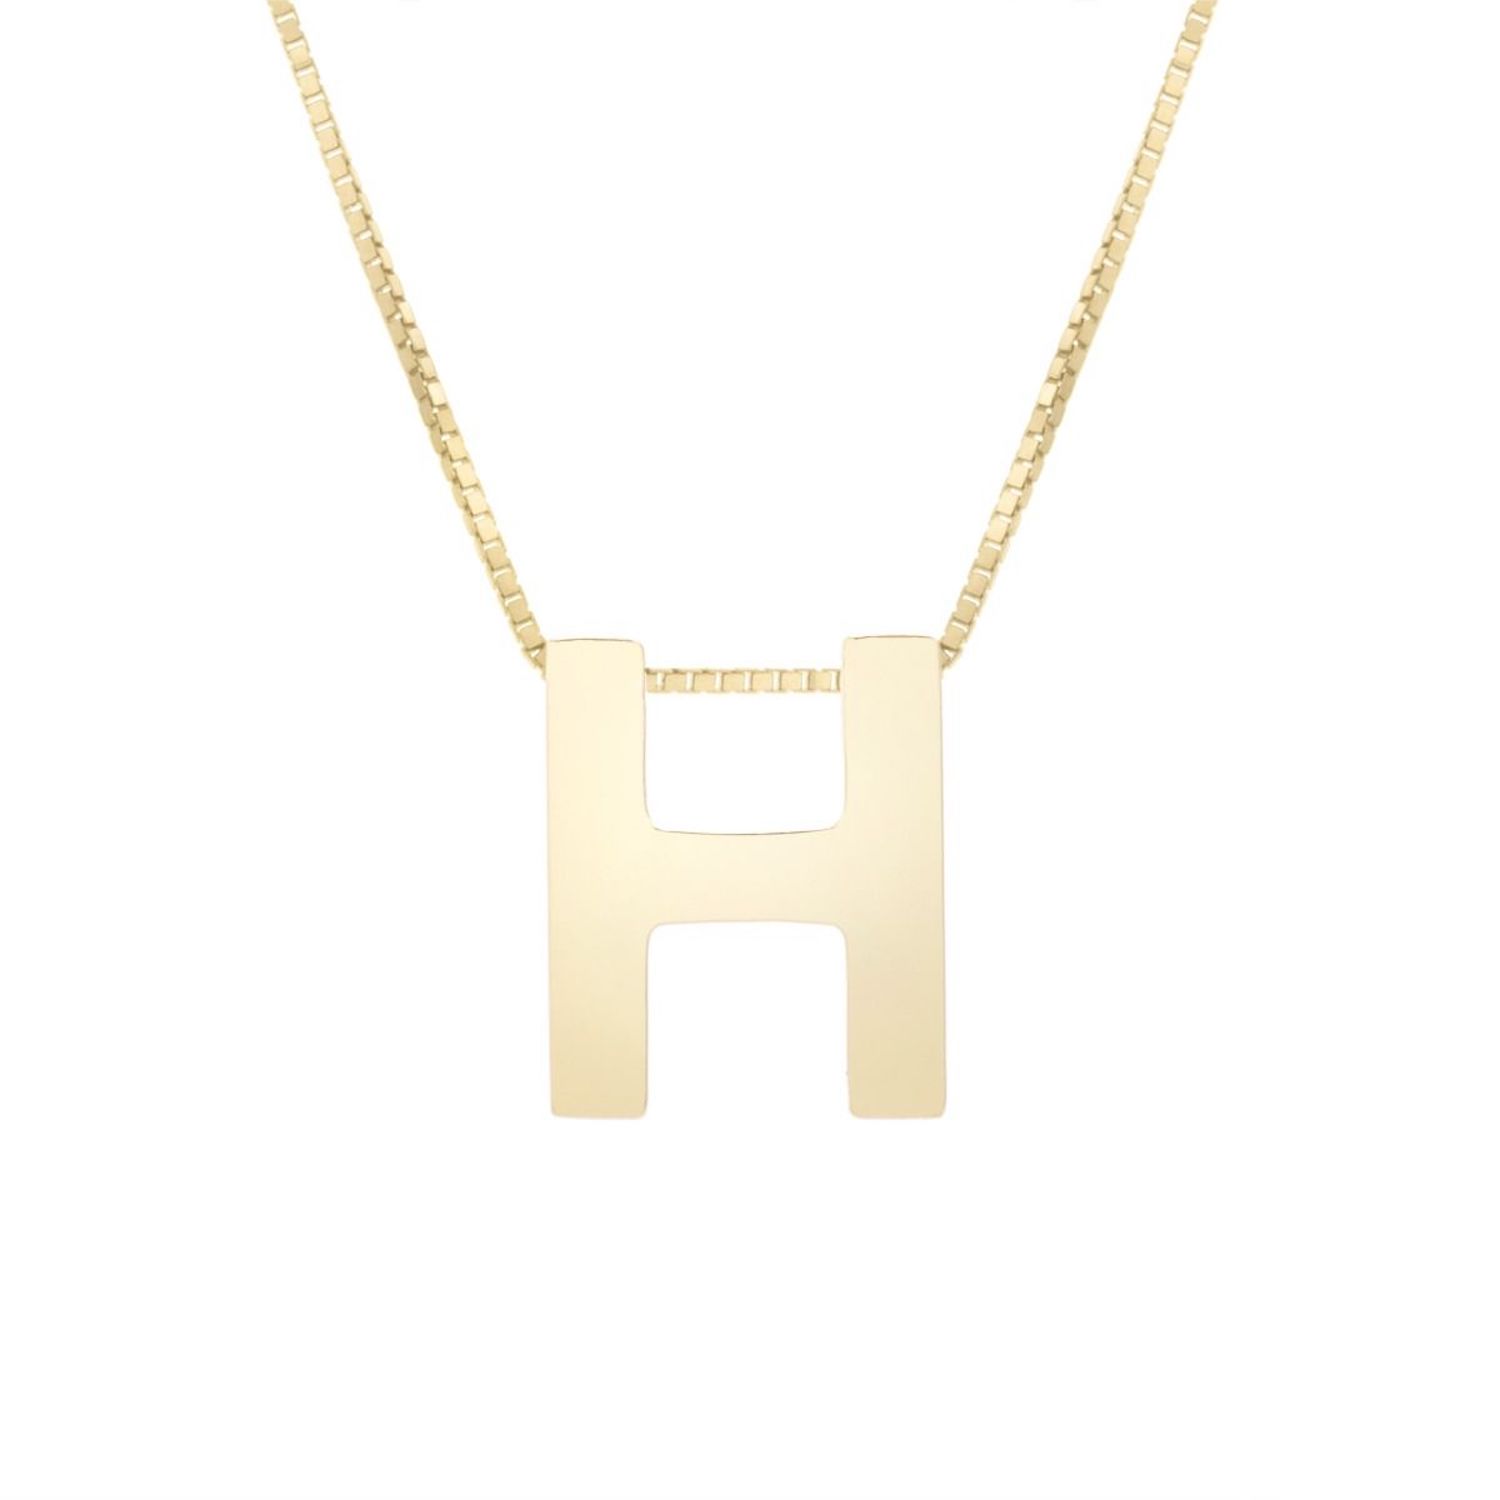 14K Yellow Gold Block Letter Initial Pendant Box Chain Necklace 16"-18" - H